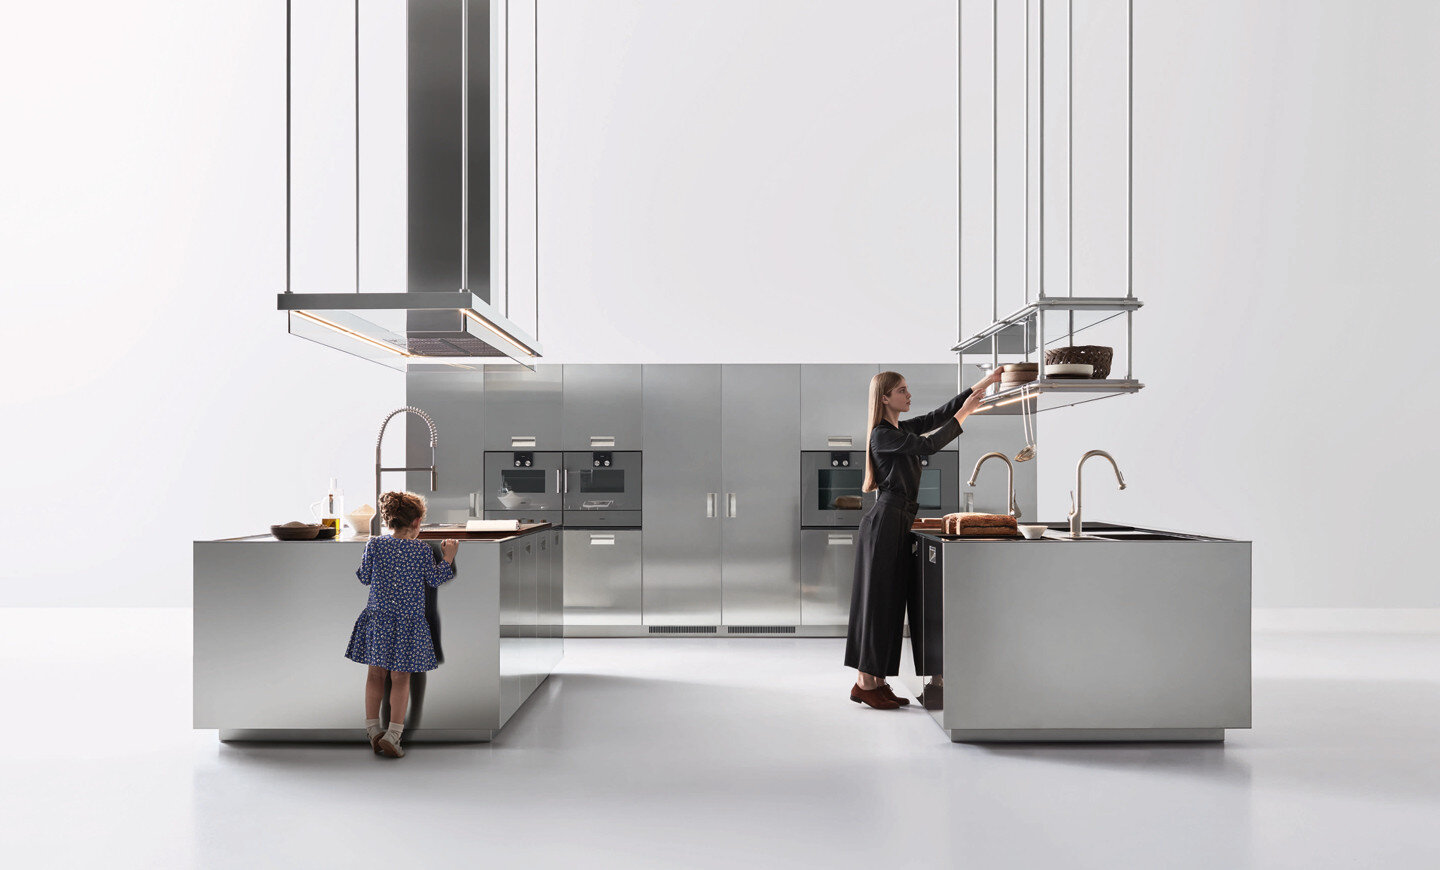 A double island kitchen helps you prepare meals together.